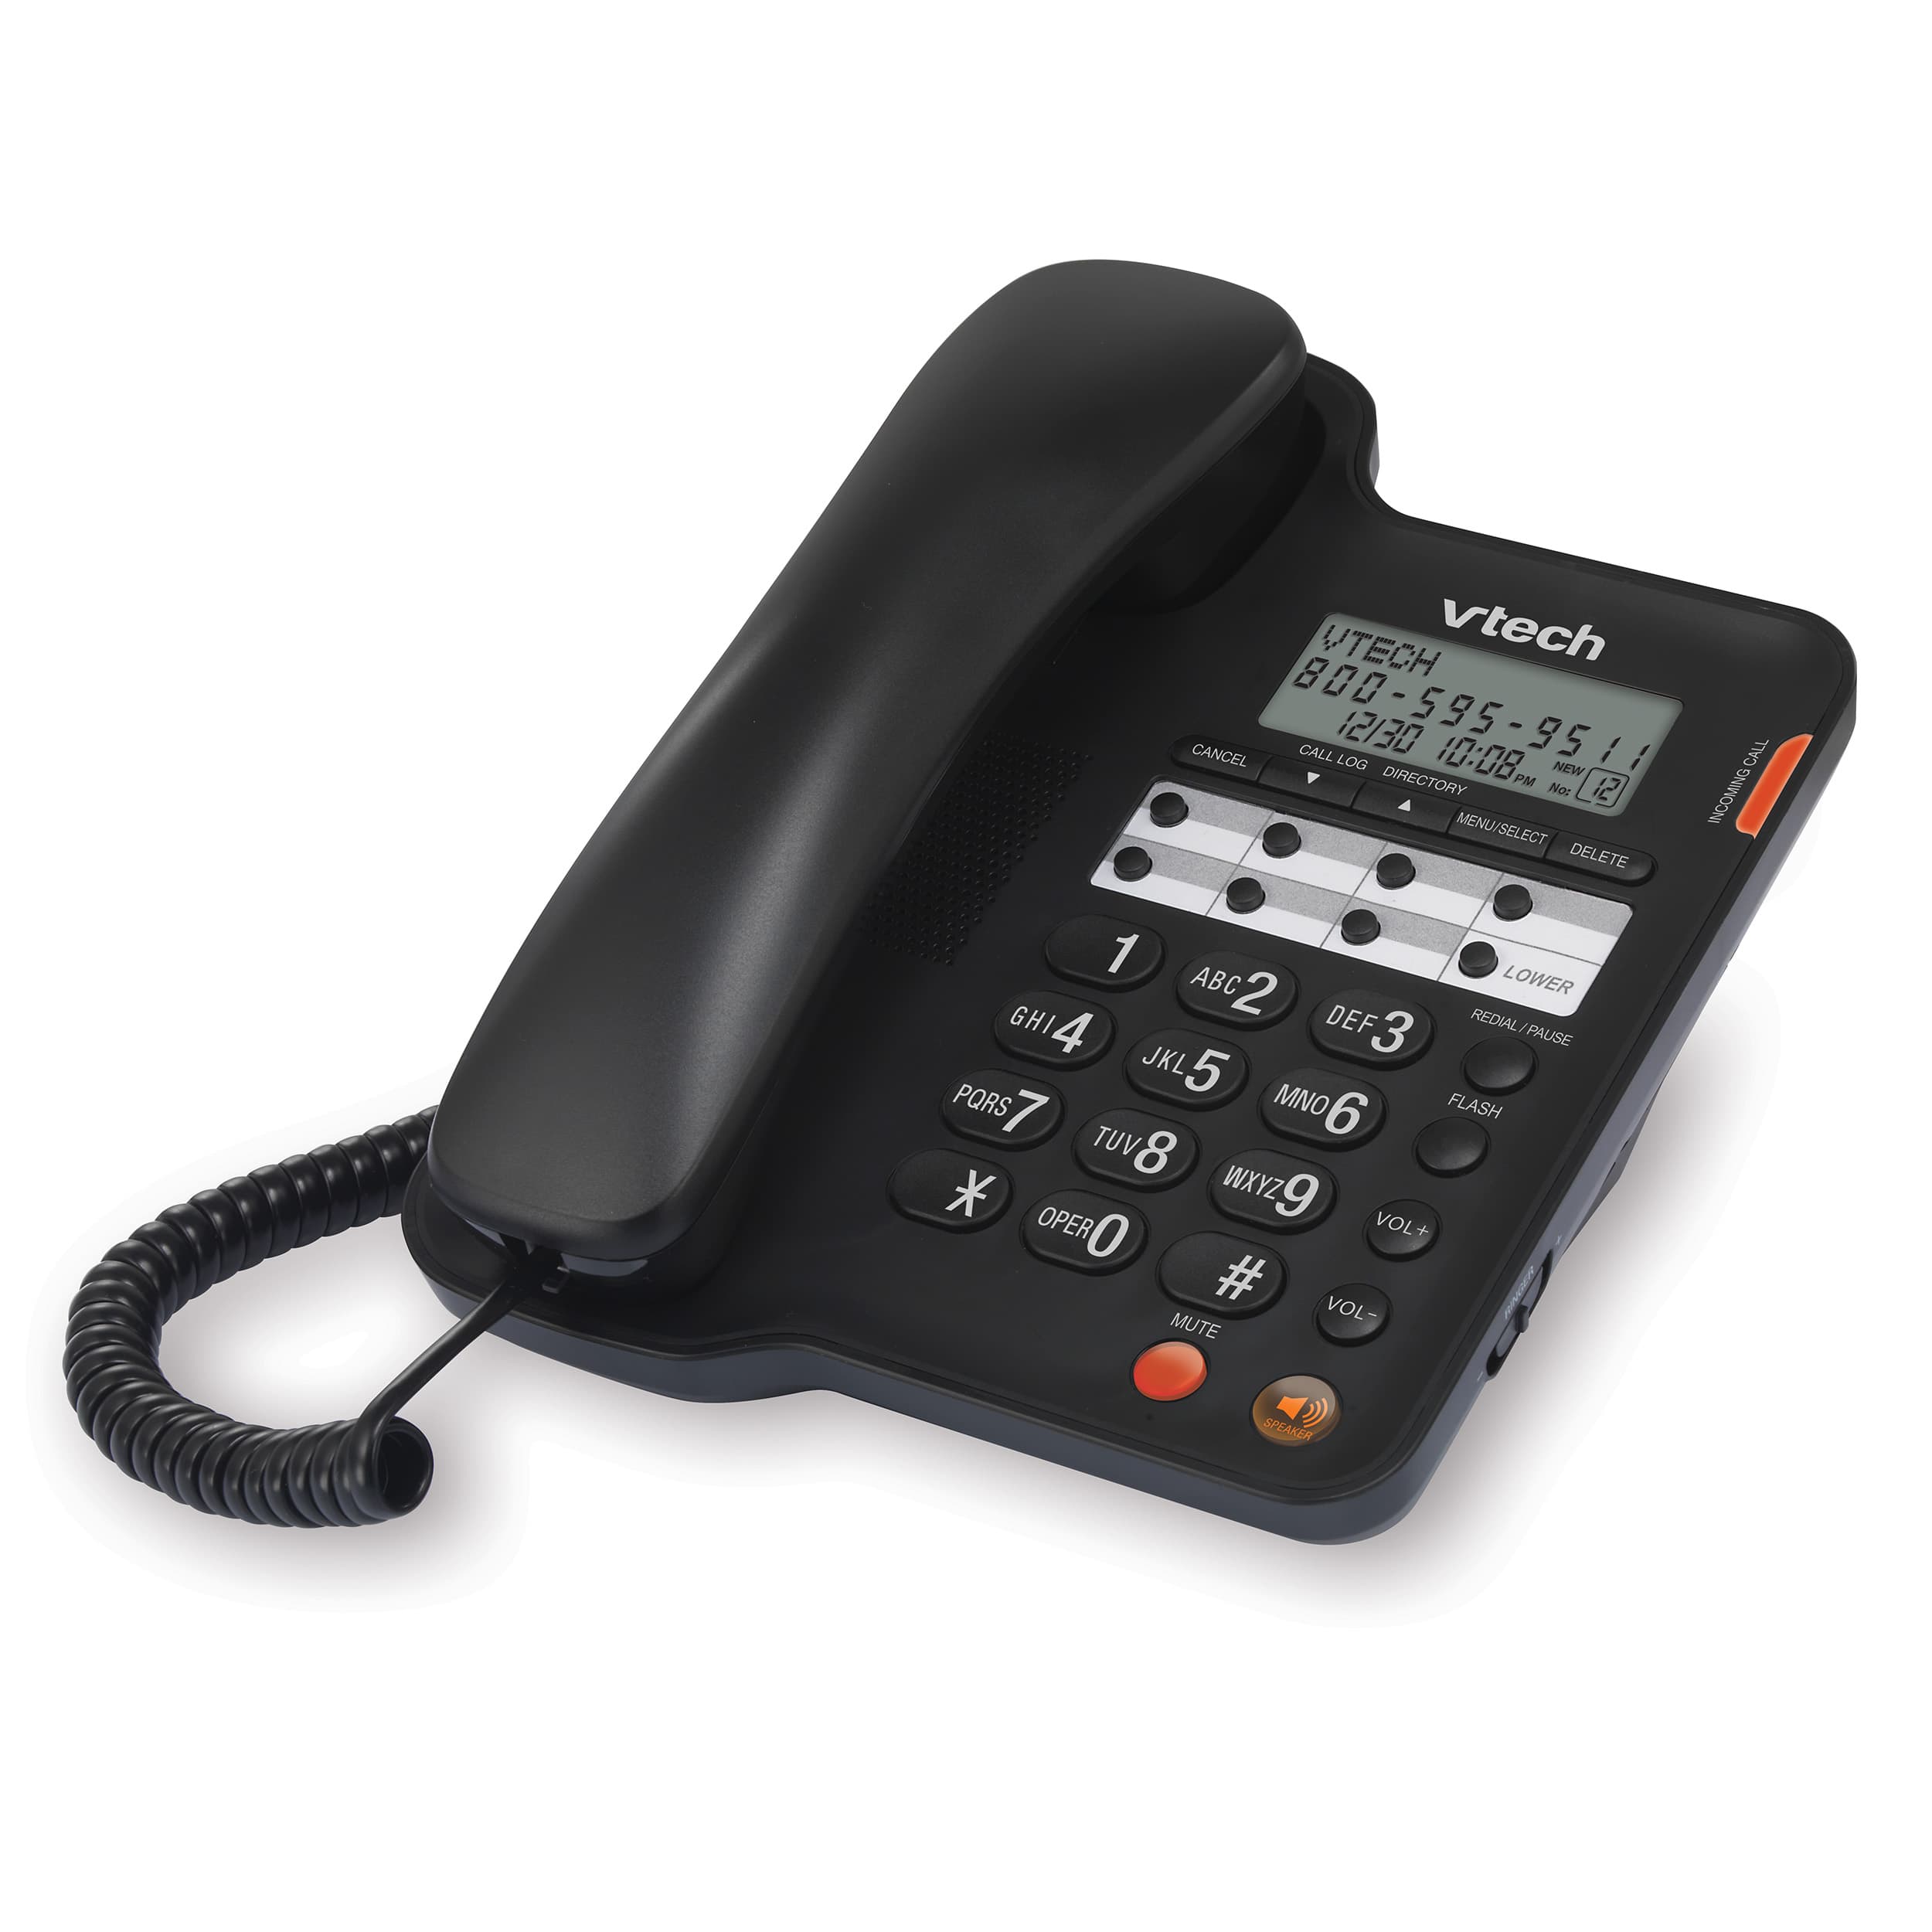 Corded Speakerphone with Caller ID/Call waiting